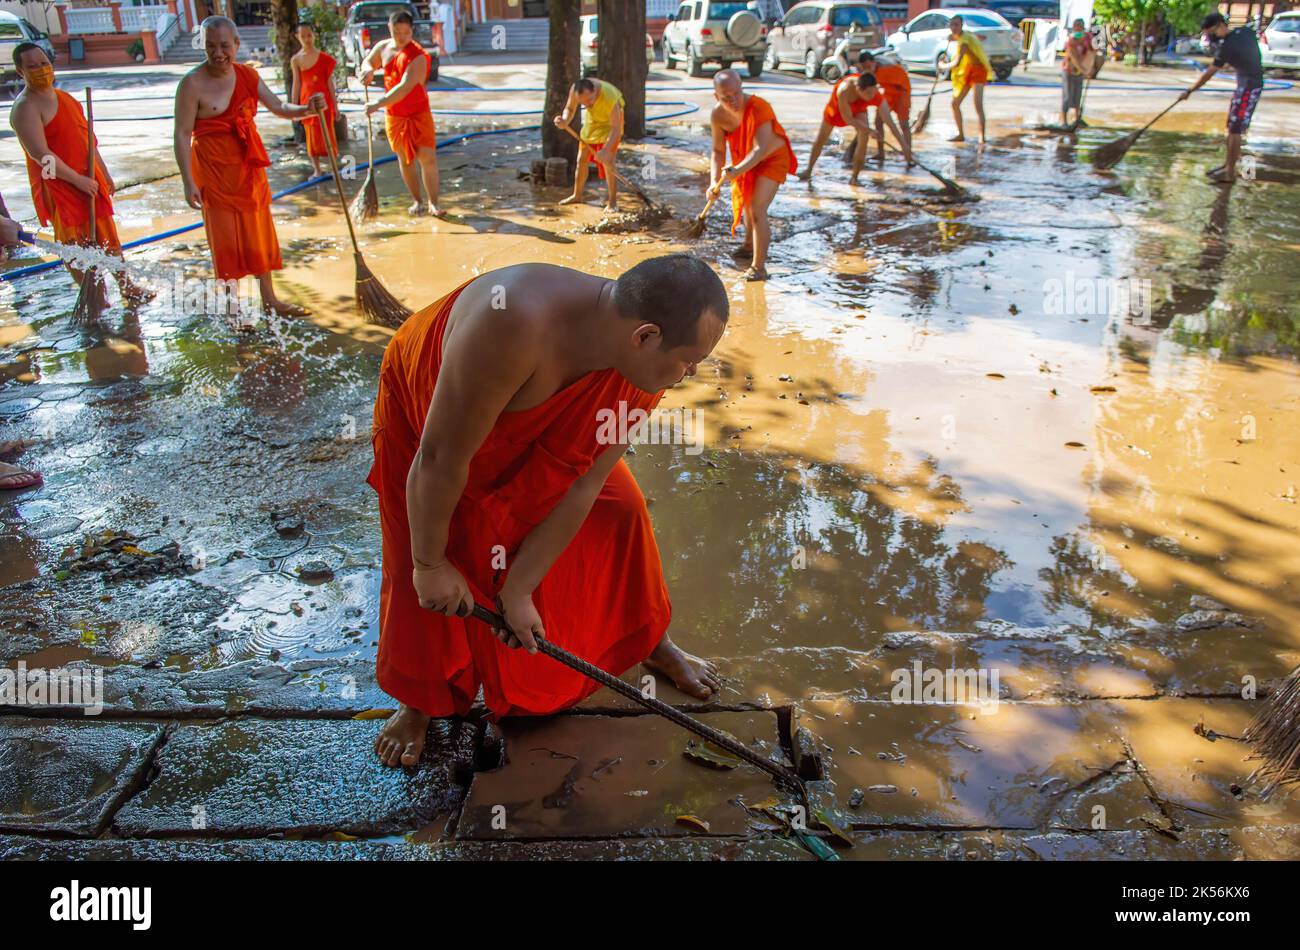 Monks clean up a temple in Chiang Mai's Muang district during the aftermath. The flood situation at Chiang Mai in the northern part of Thailand comes to an ease with decreasing water levels. The floods damaged commercial areas, the Chang Khlan Road and the Night Bazaar. Stock Photo